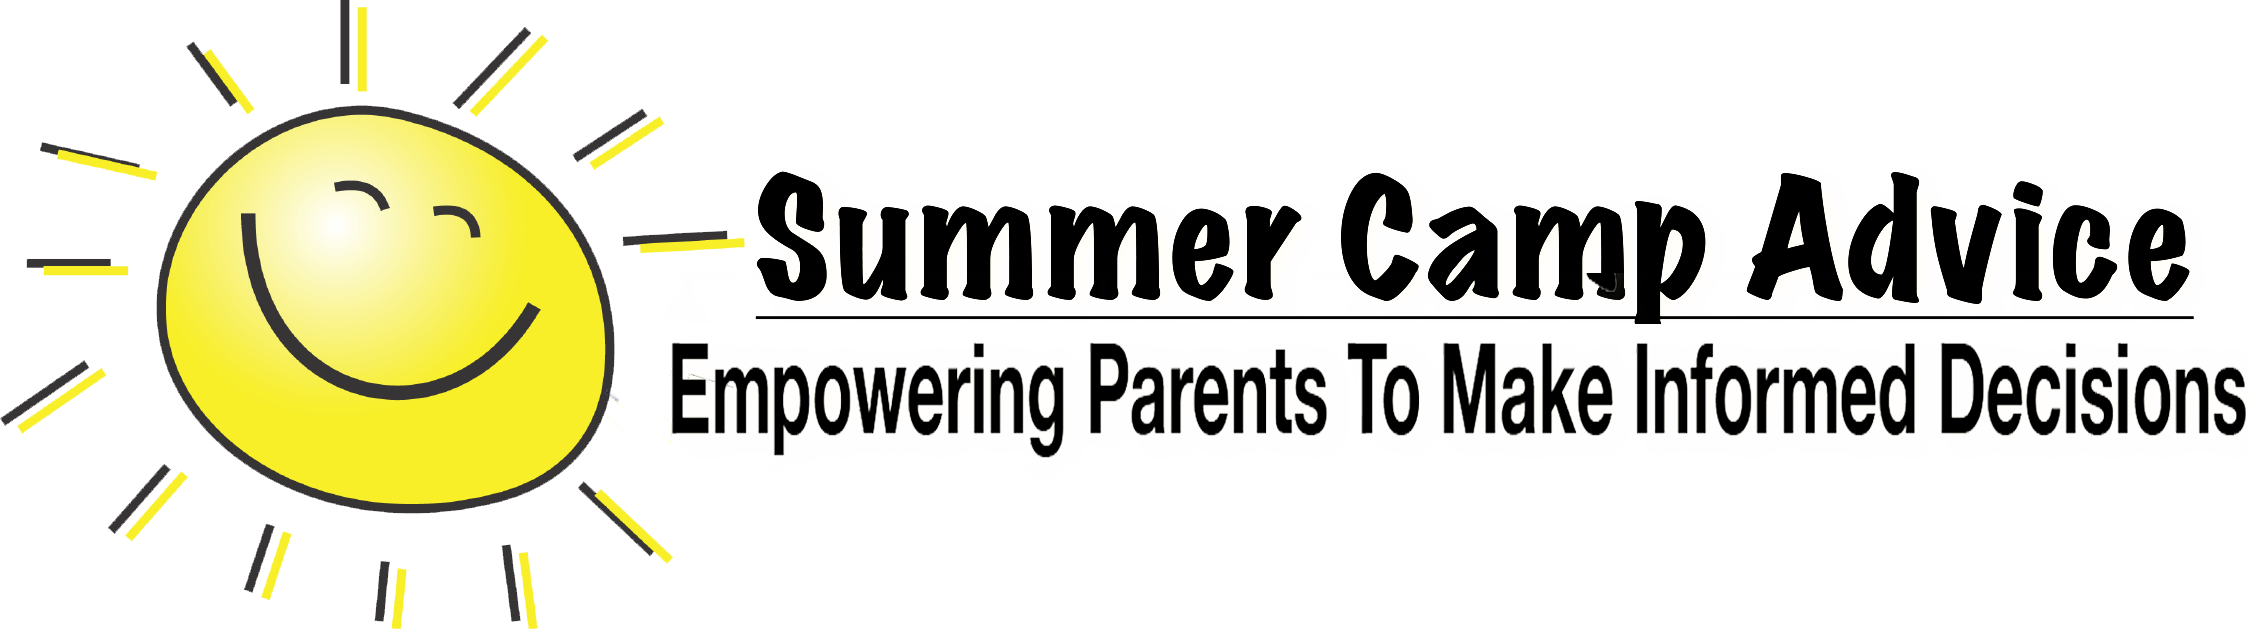 Summer Camp Advice - A Free Guide helping  parents find the best summer camp for their children in the midwest USA